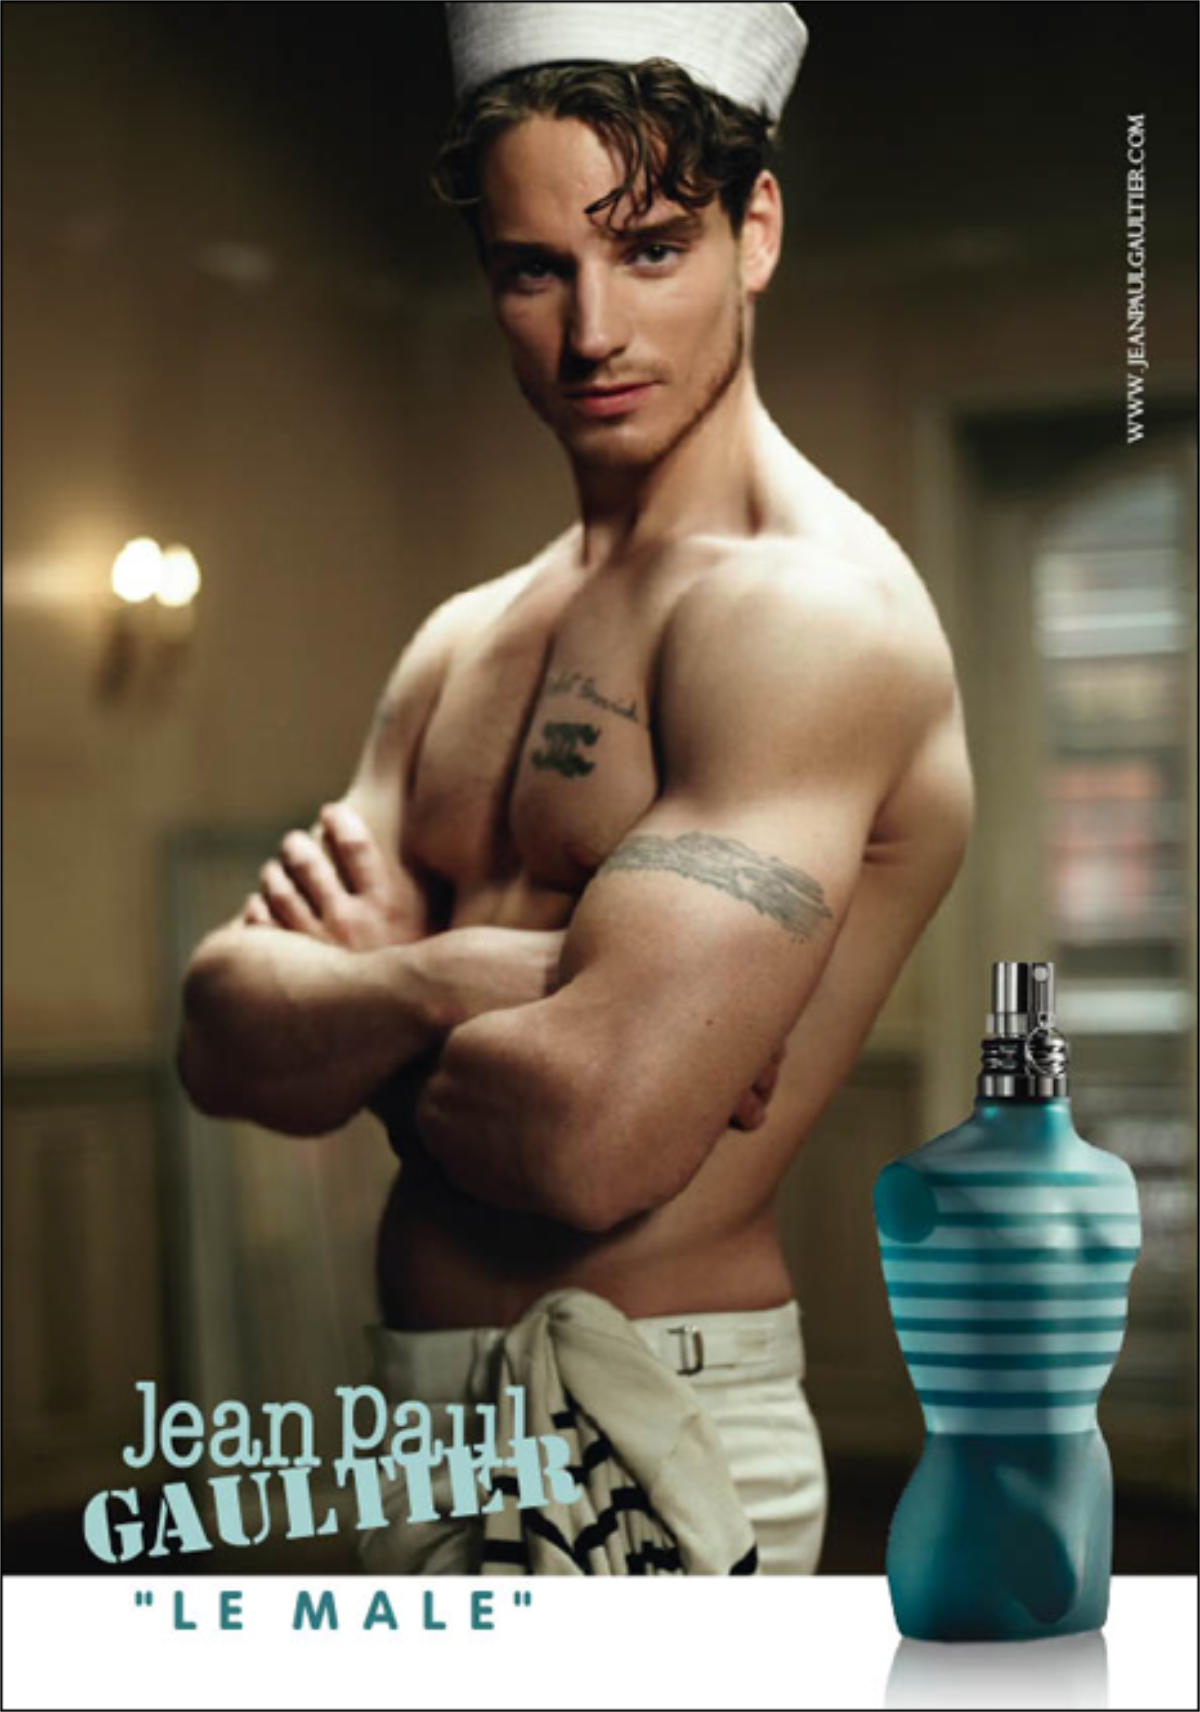 Le Male by Jean Paul Gaultier - 25th anniversary